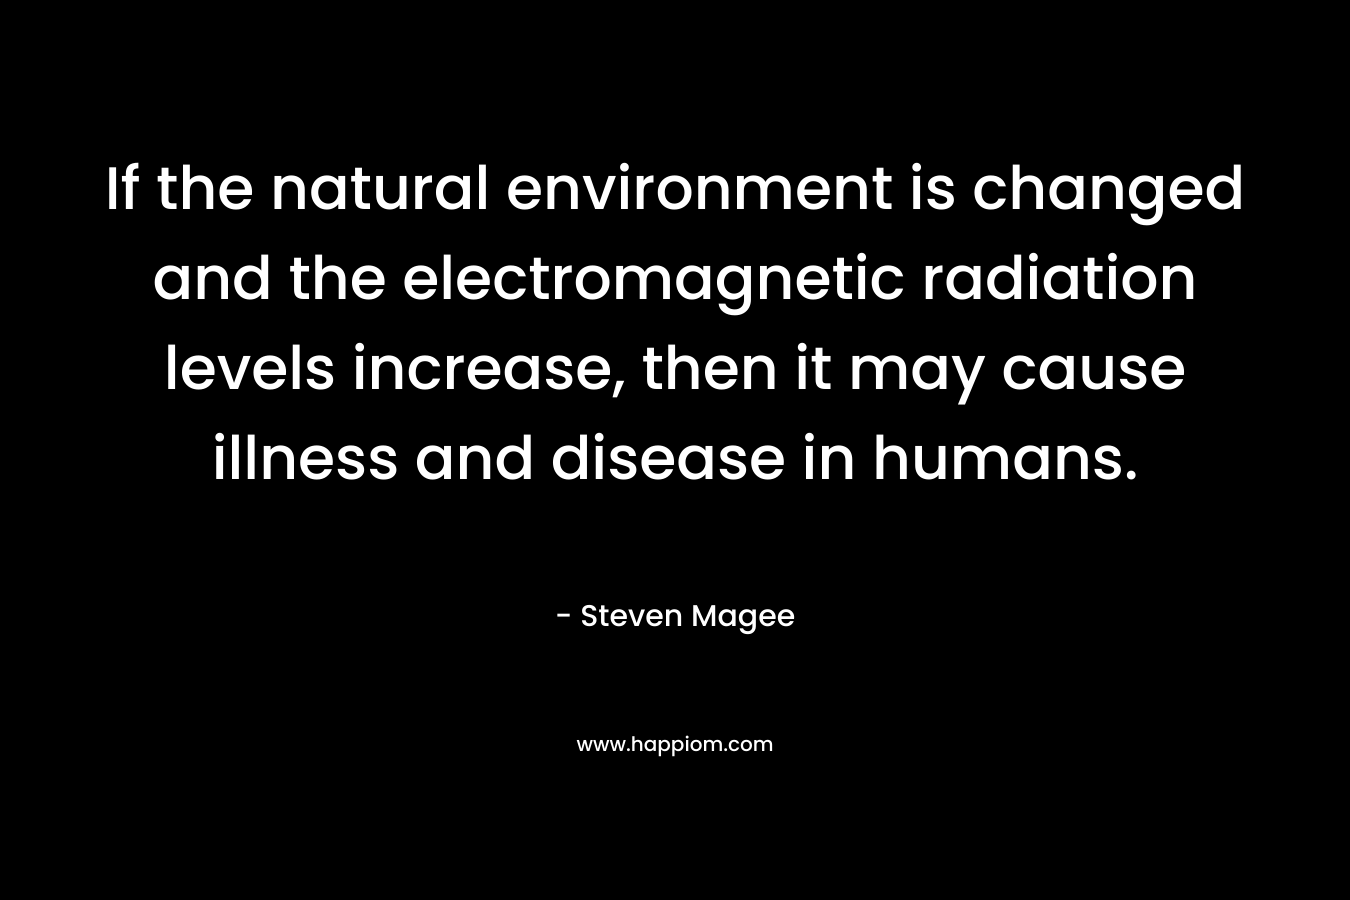 If the natural environment is changed and the electromagnetic radiation levels increase, then it may cause illness and disease in humans.